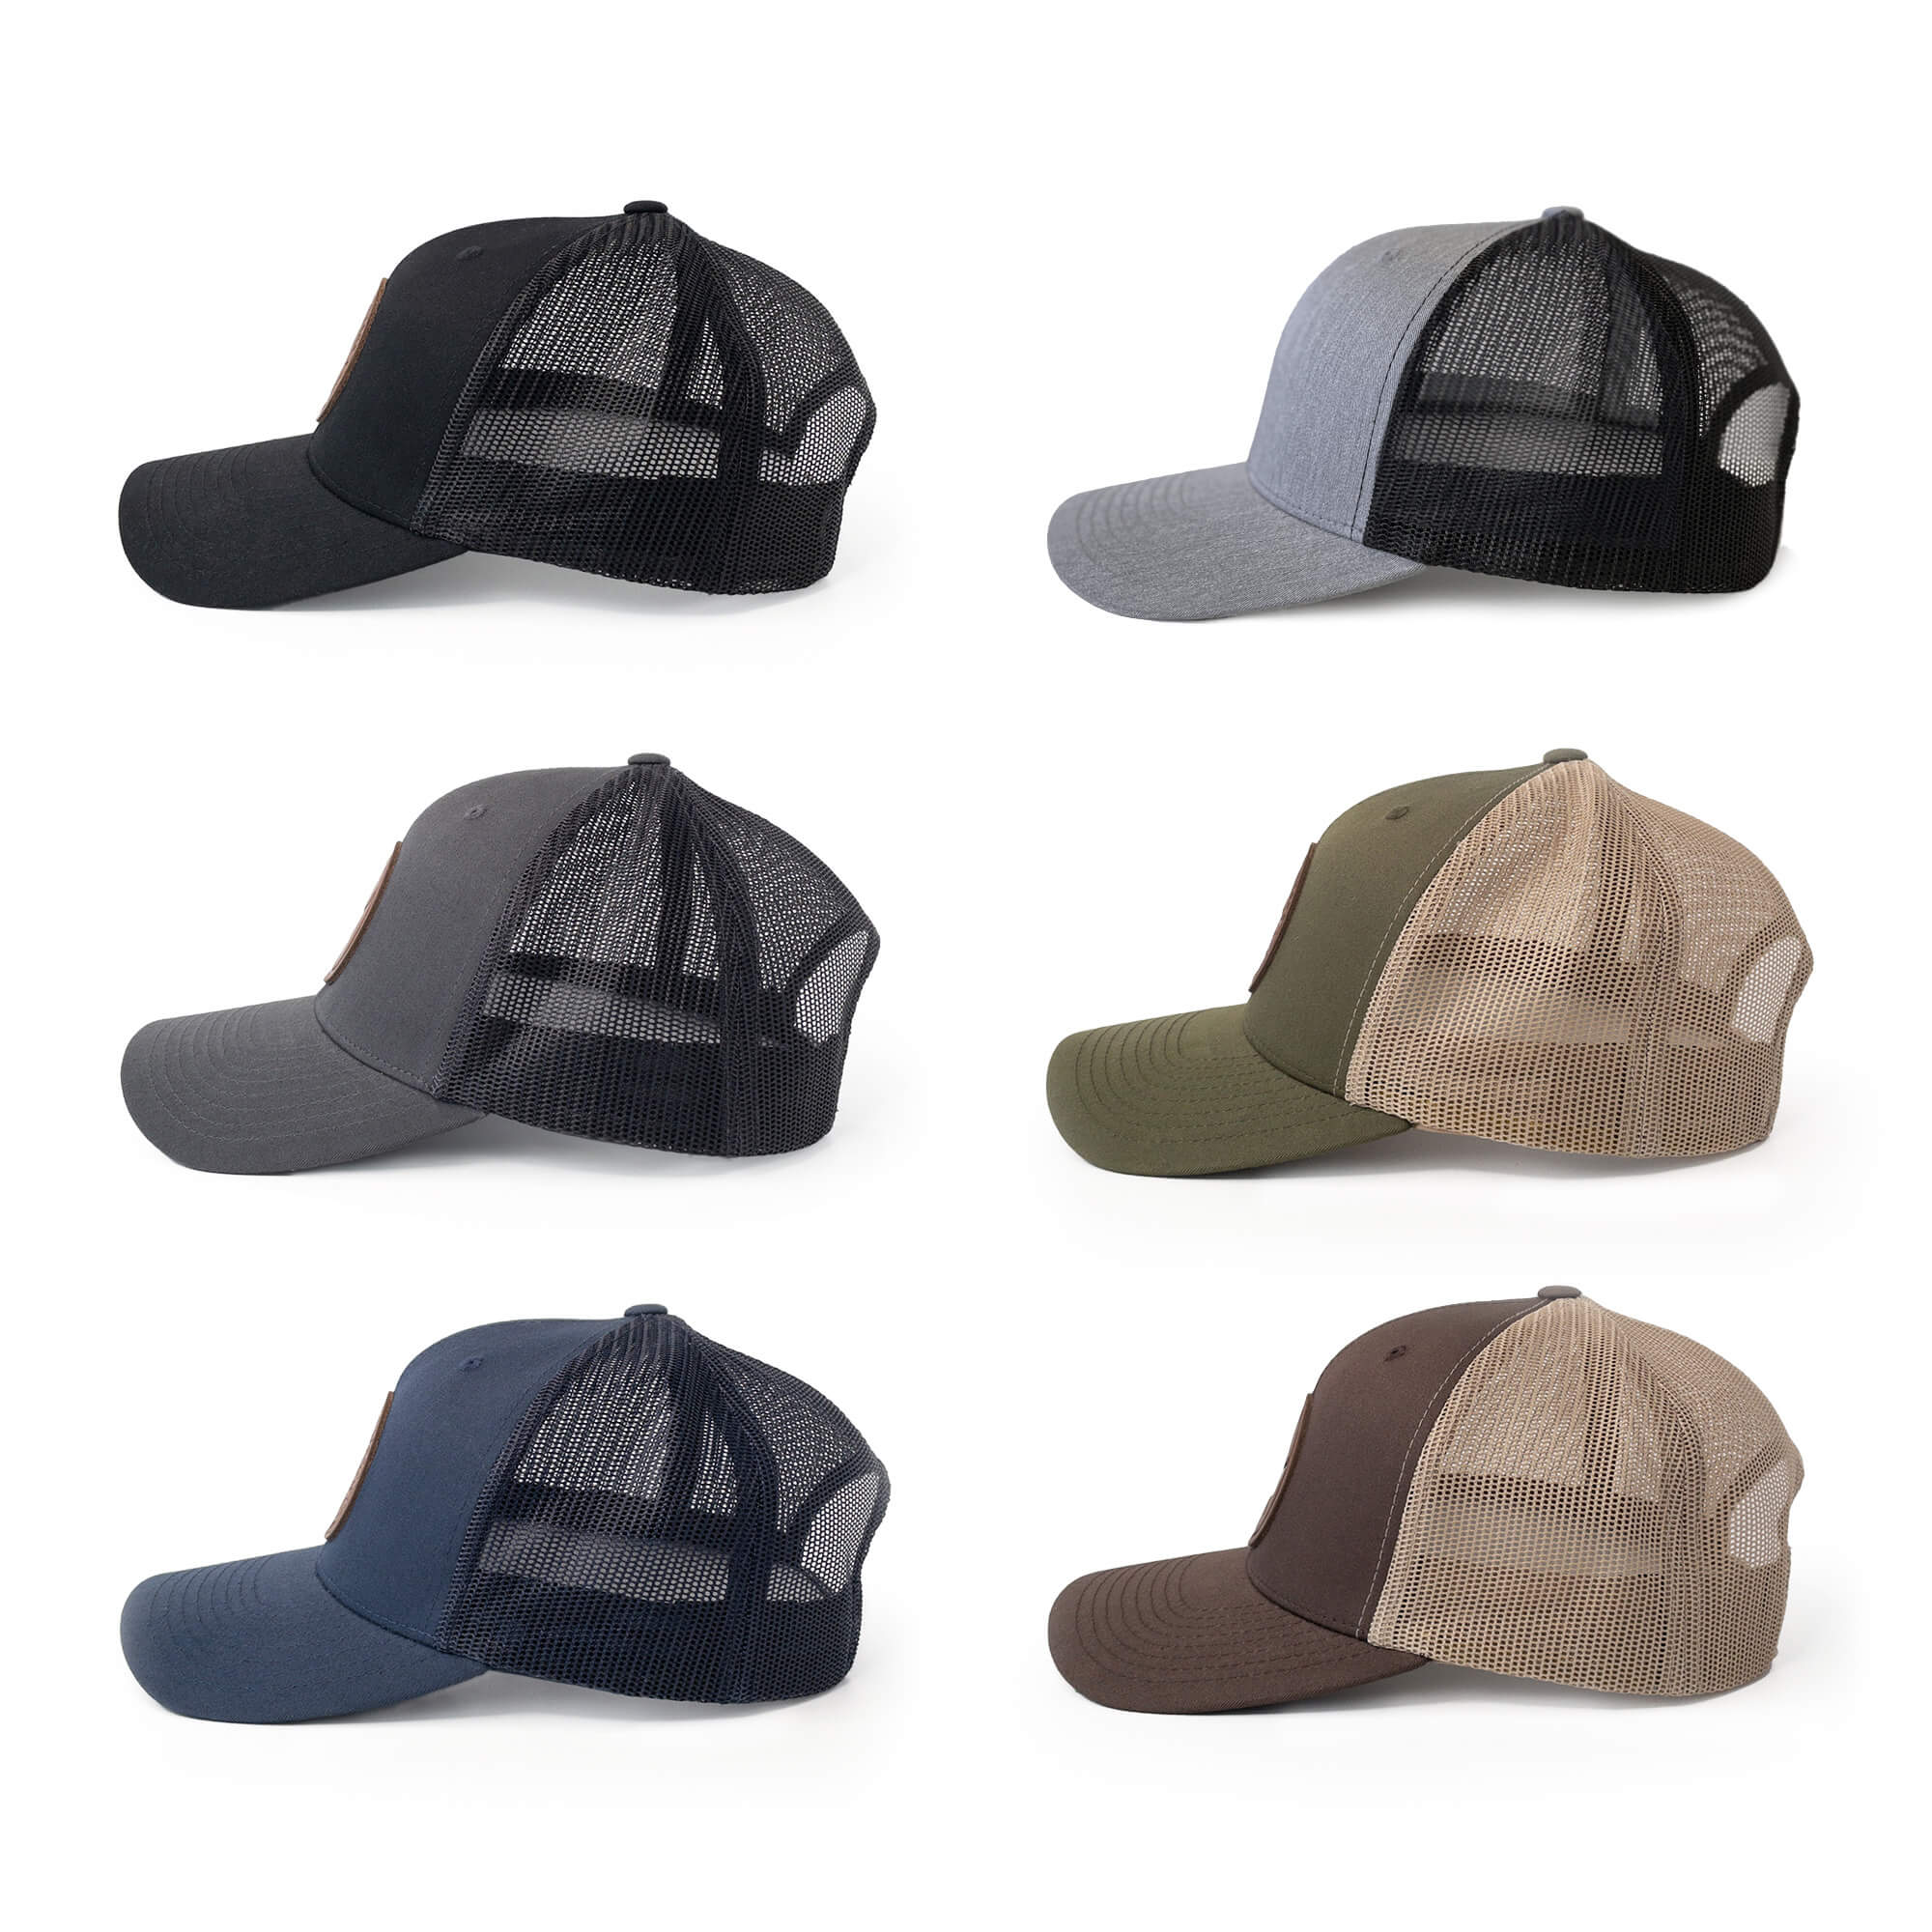 Leather patch trucker hats available in 6 colors | BLACK-003-004, CHARC-003-004, NAVY-003-004, HGREY-003-004, MOSS-003-004, BROWN-003-004